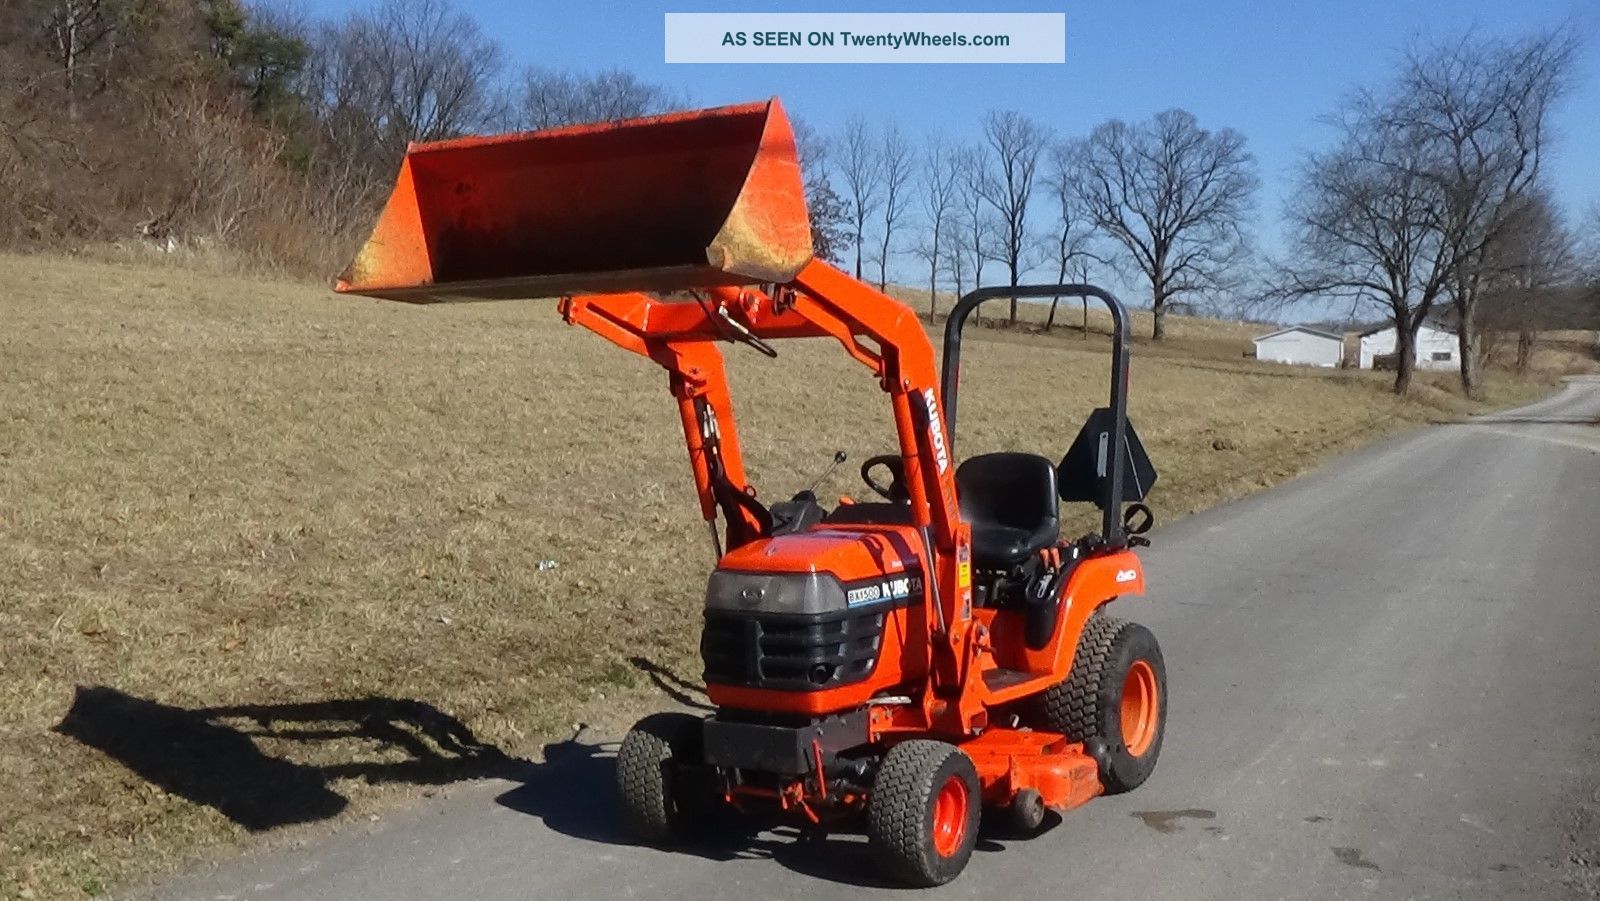 2003 Kubota Bx1500 4x4 Tractor With Loader Belly Mower And Manuals